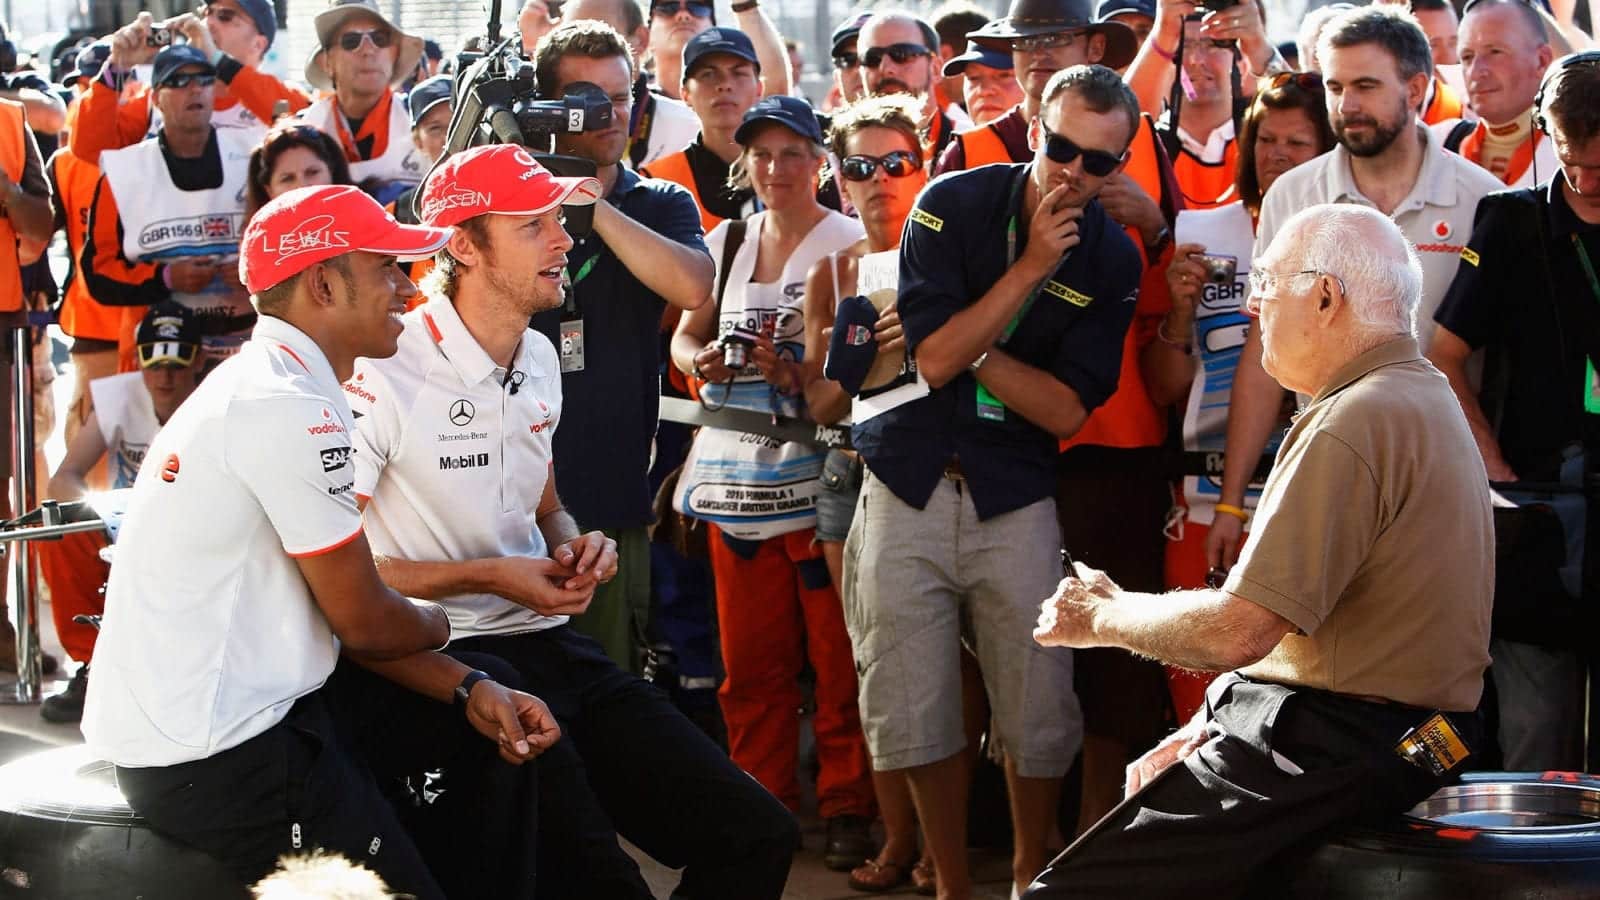 NORTHAMPTON, UNITED KINGDOM - JULY 10: Lewis Hamilton of Great Britain and McLaren Mercedes and Jenson Button of Great Britain and McLaren Mercedes are interviewed by Murray Walker following qualifying for the British Formula One Grand Prix at Silverstone Circuit on July 10, 2010, in Northampton, England. (Photo by Hoch Zwei/Getty Images)